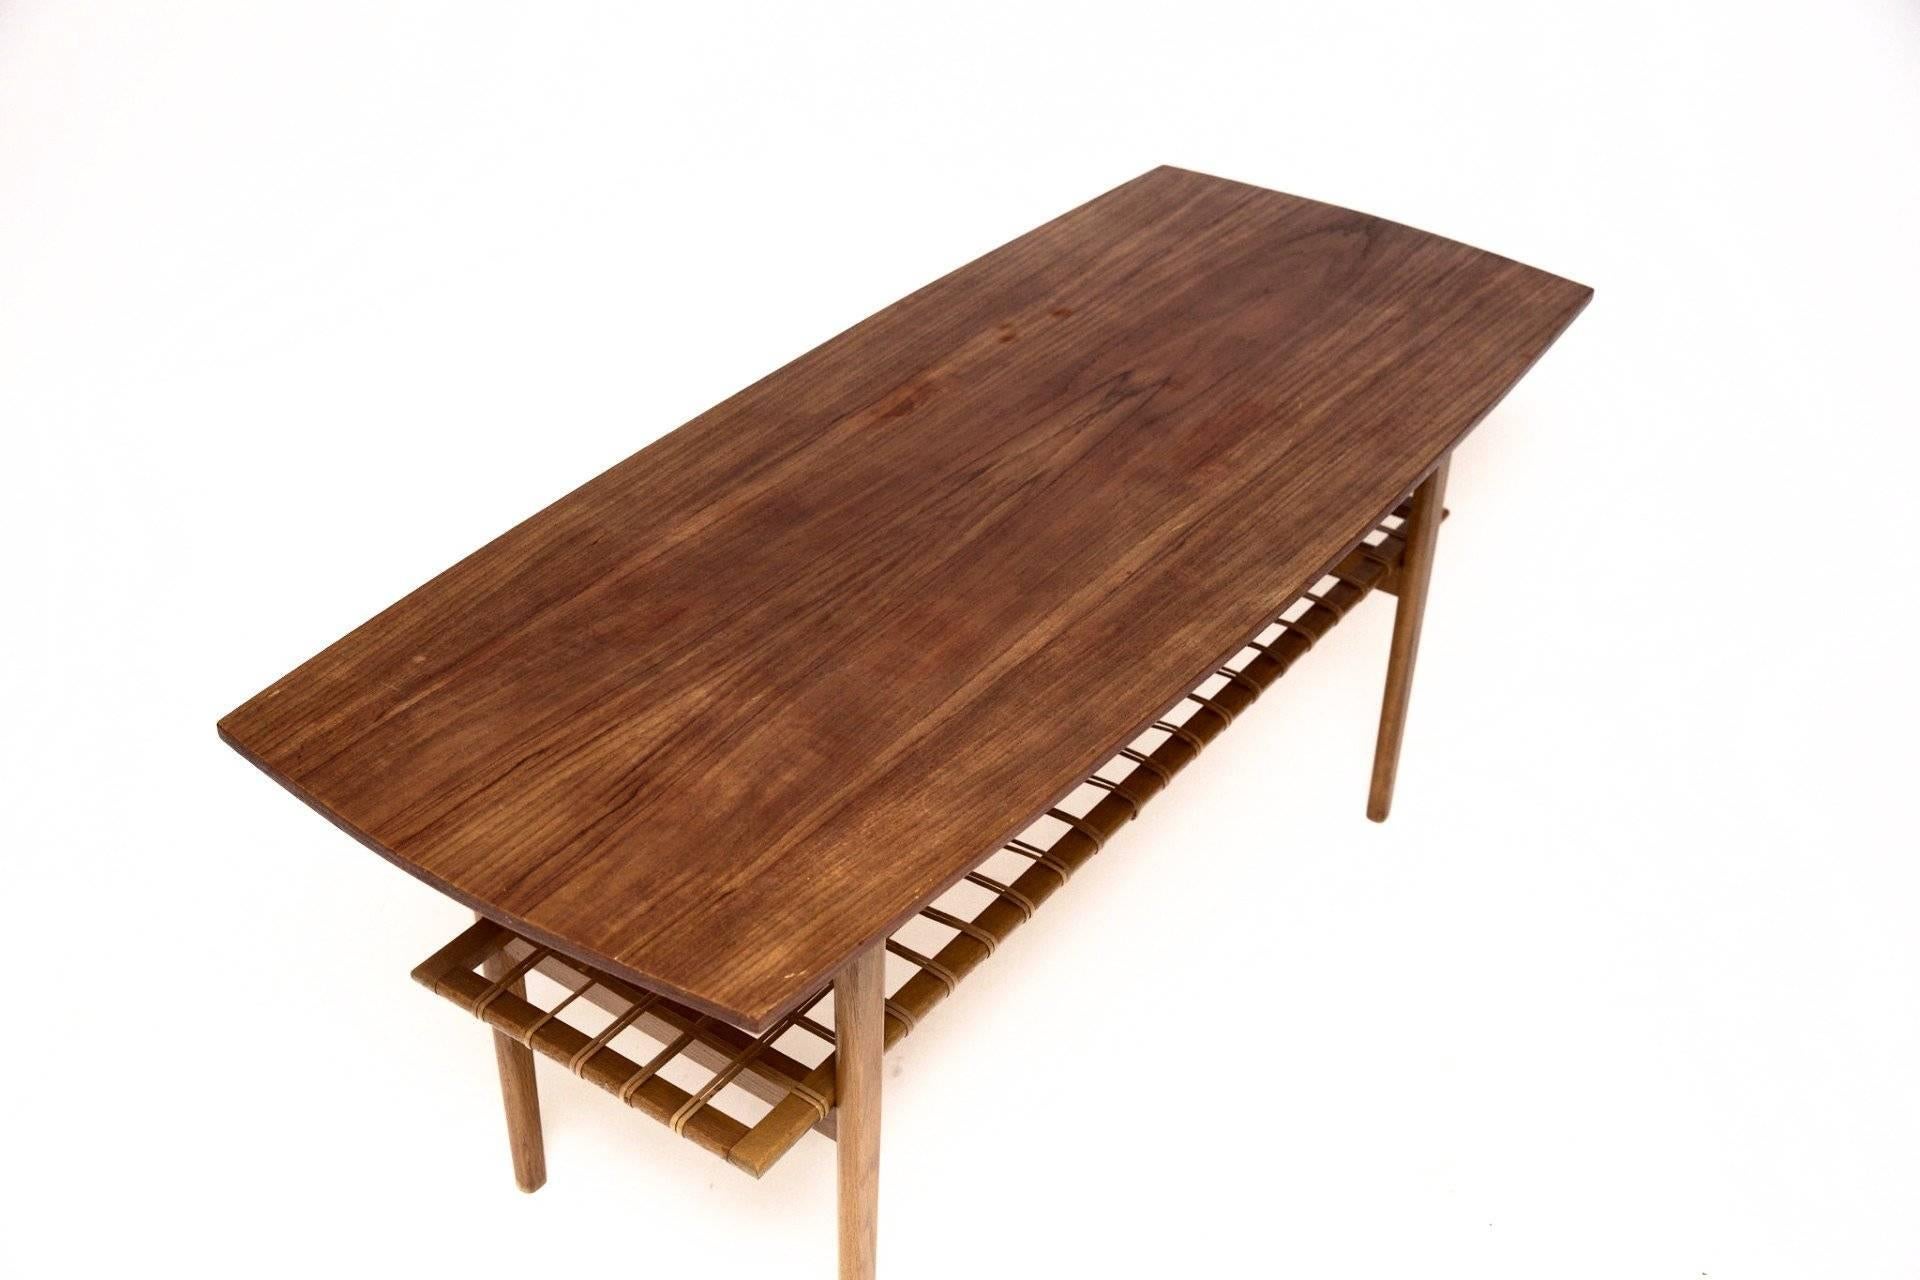 Danish Modern Teak Coffee Table In Excellent Condition For Sale In Zurich, CH